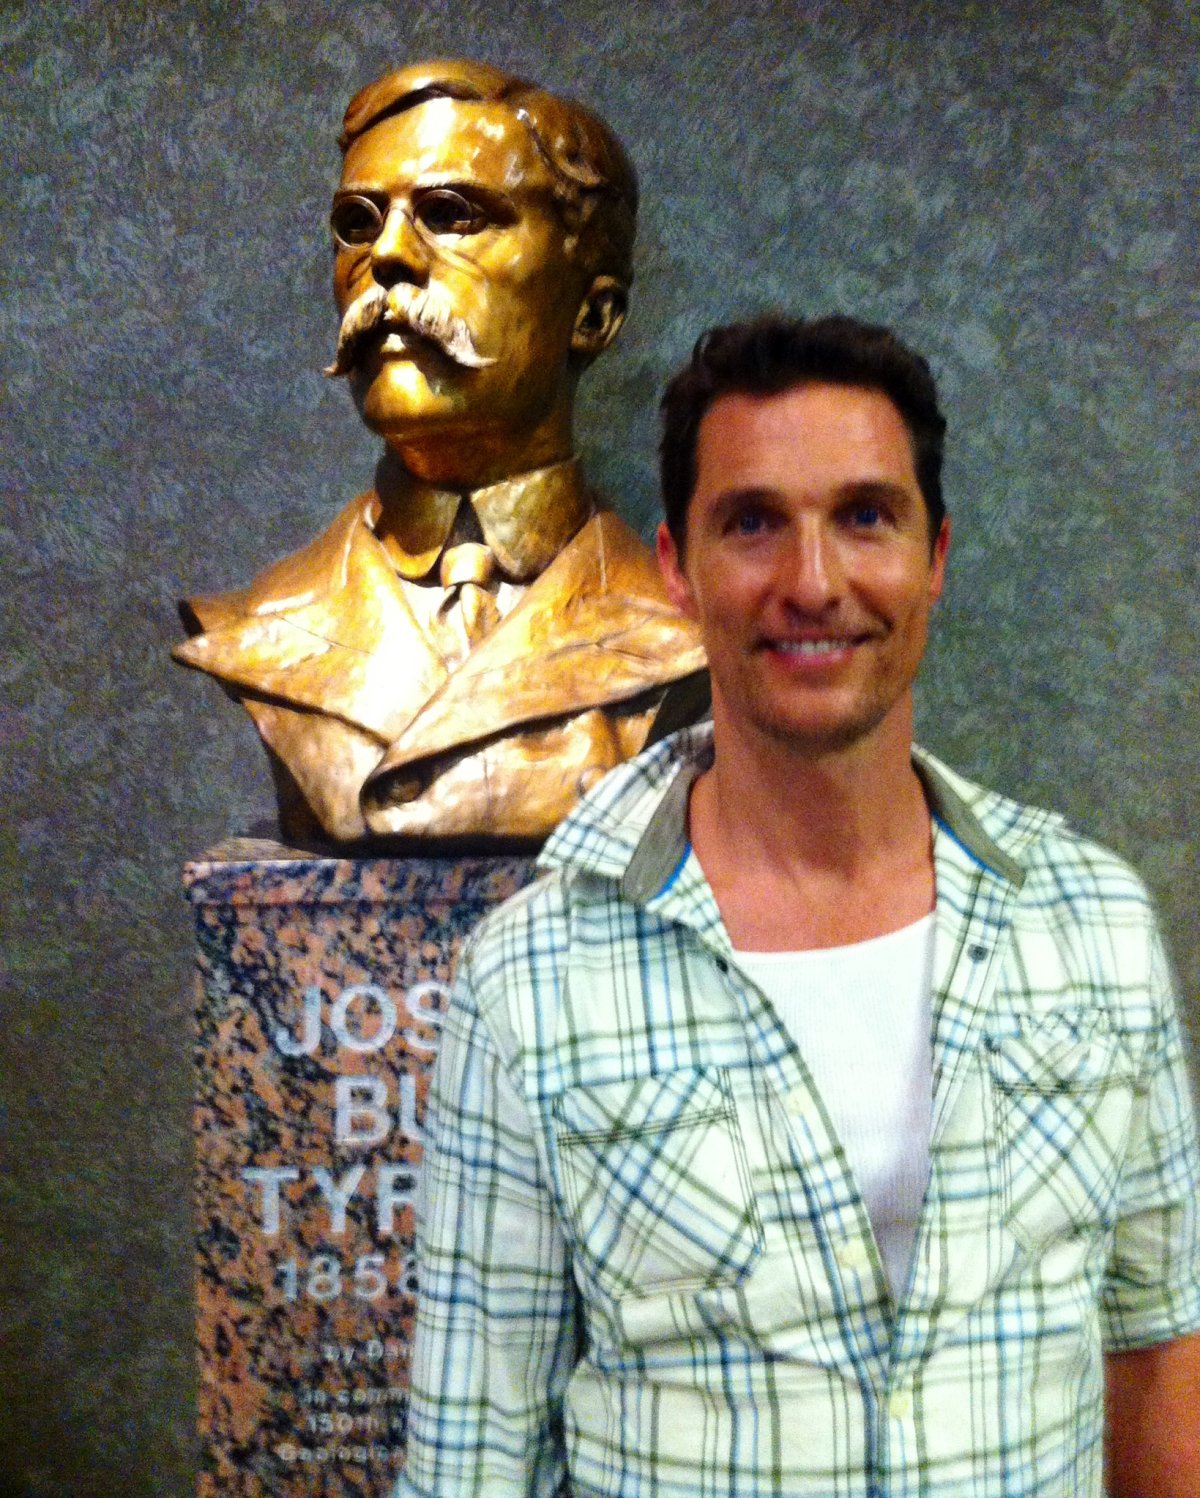 Matthew McConaughey poses at the Royal Tyrell Museum.